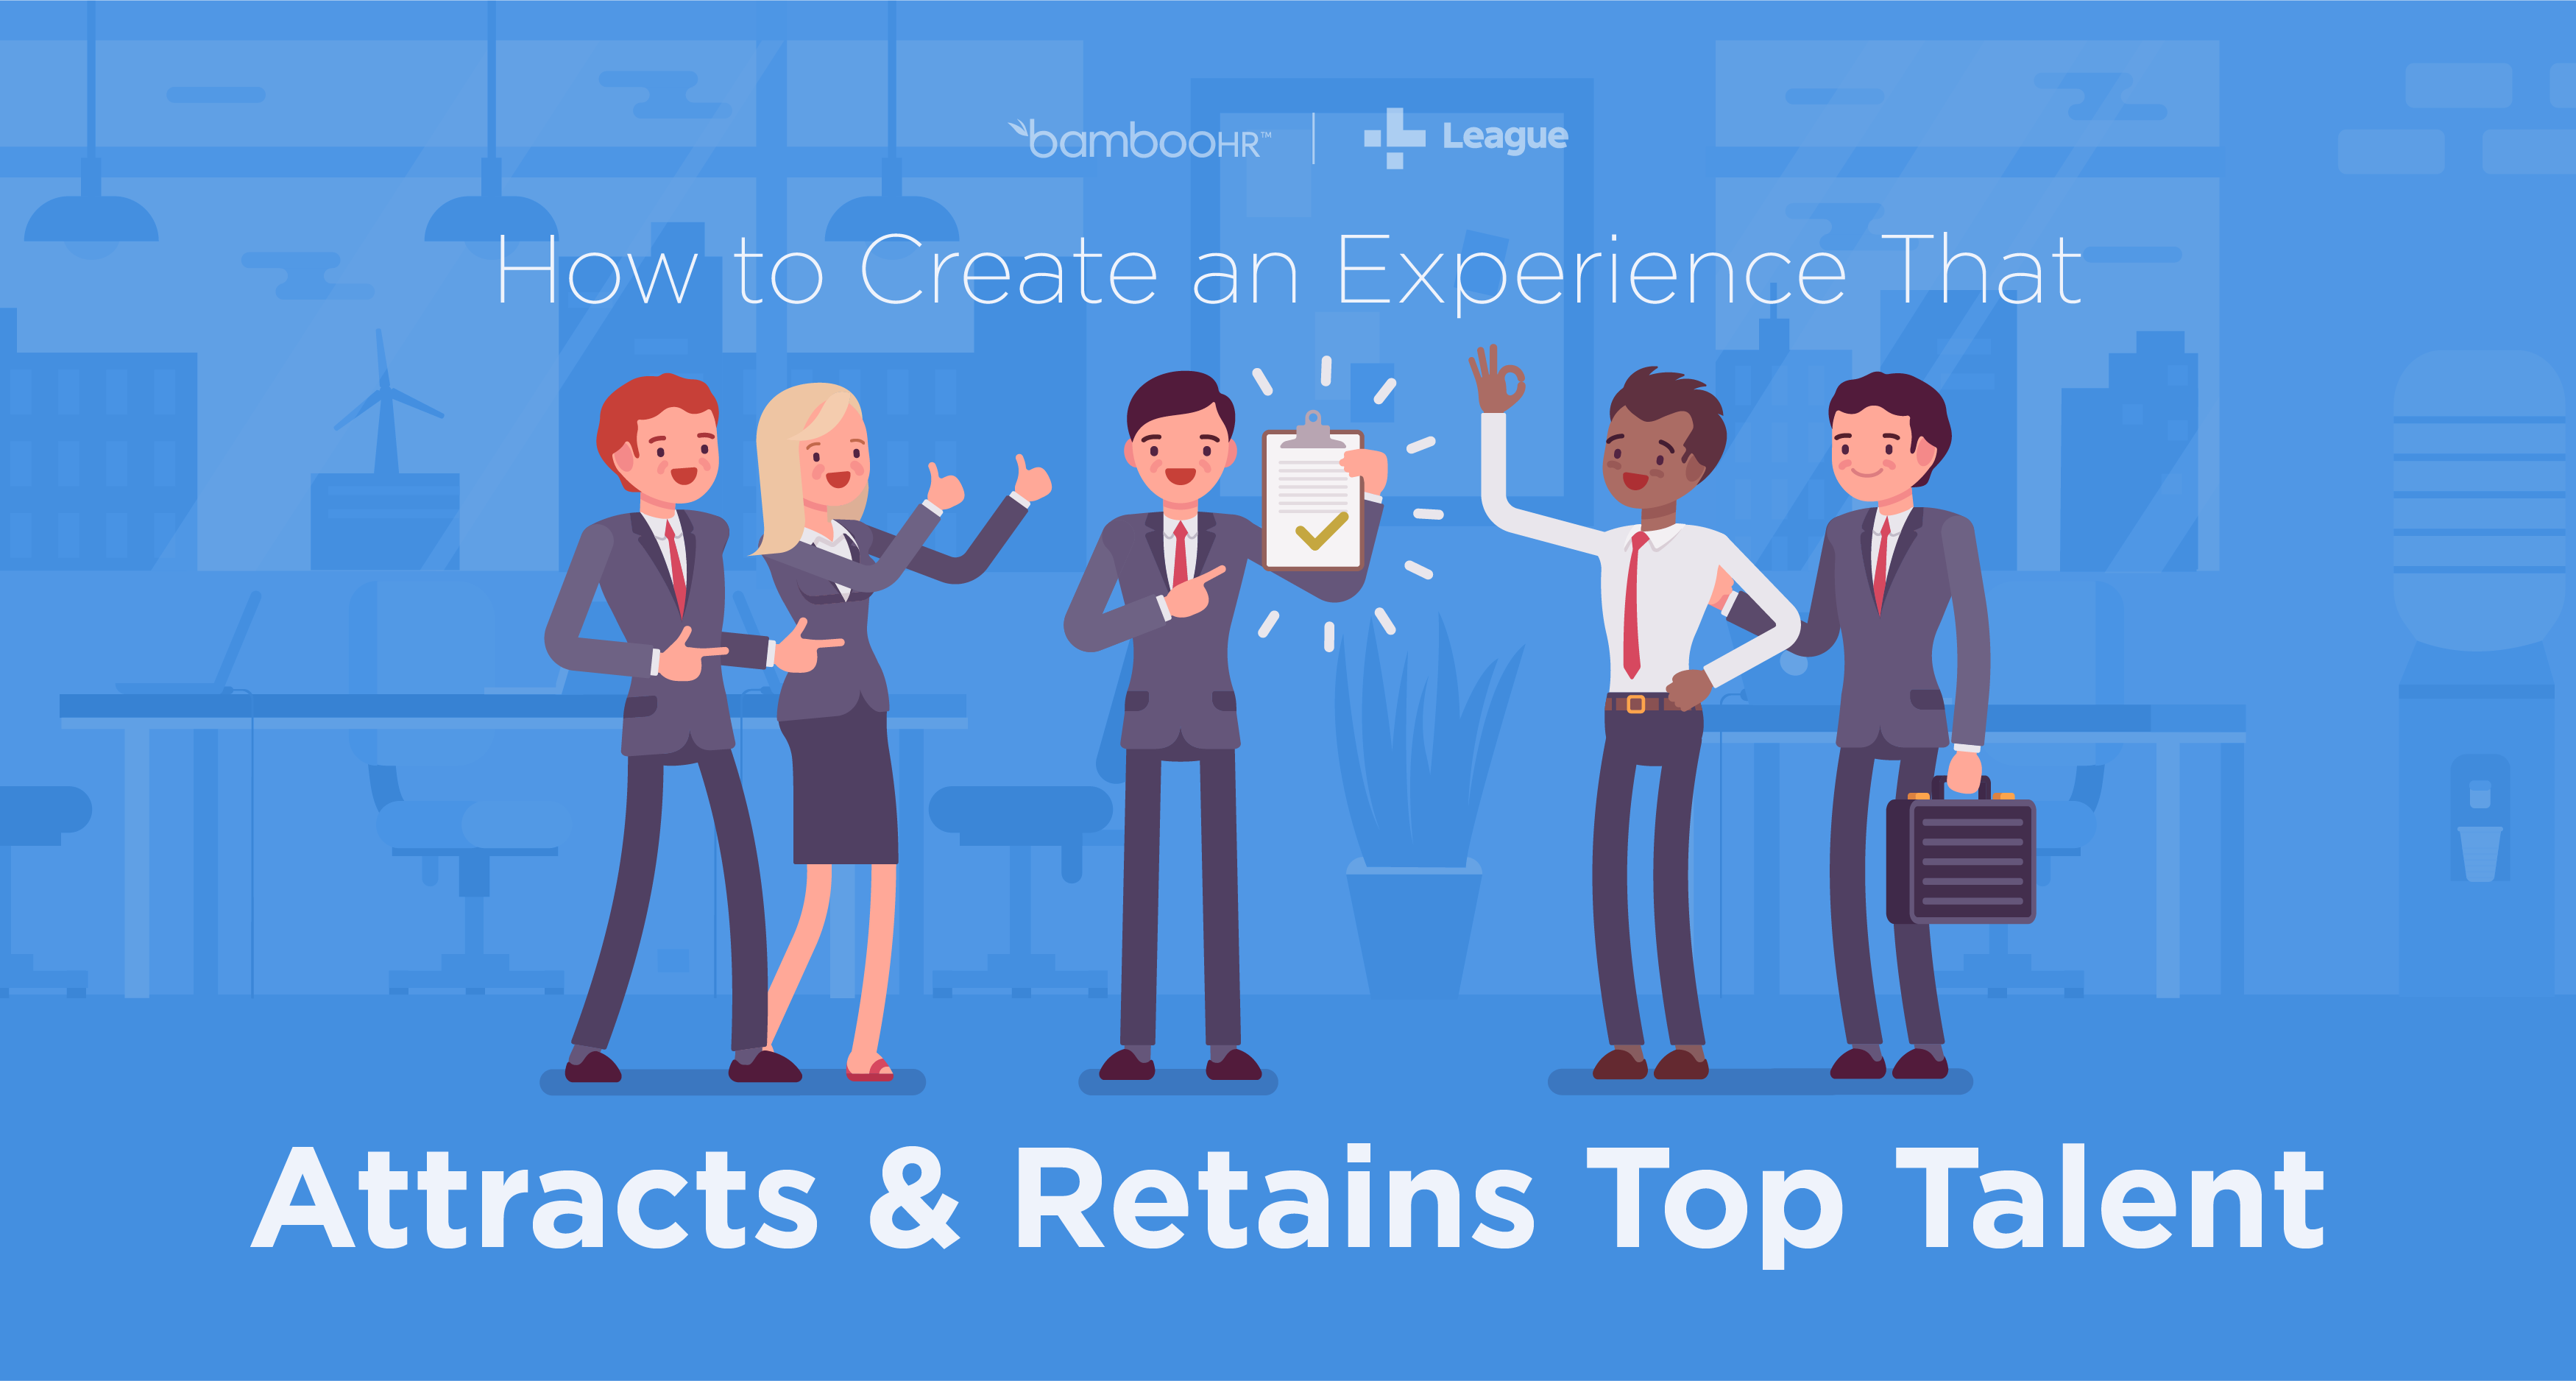 Employee Experience Matters: How To Create An Experience That Attracts & Retains Top Talent